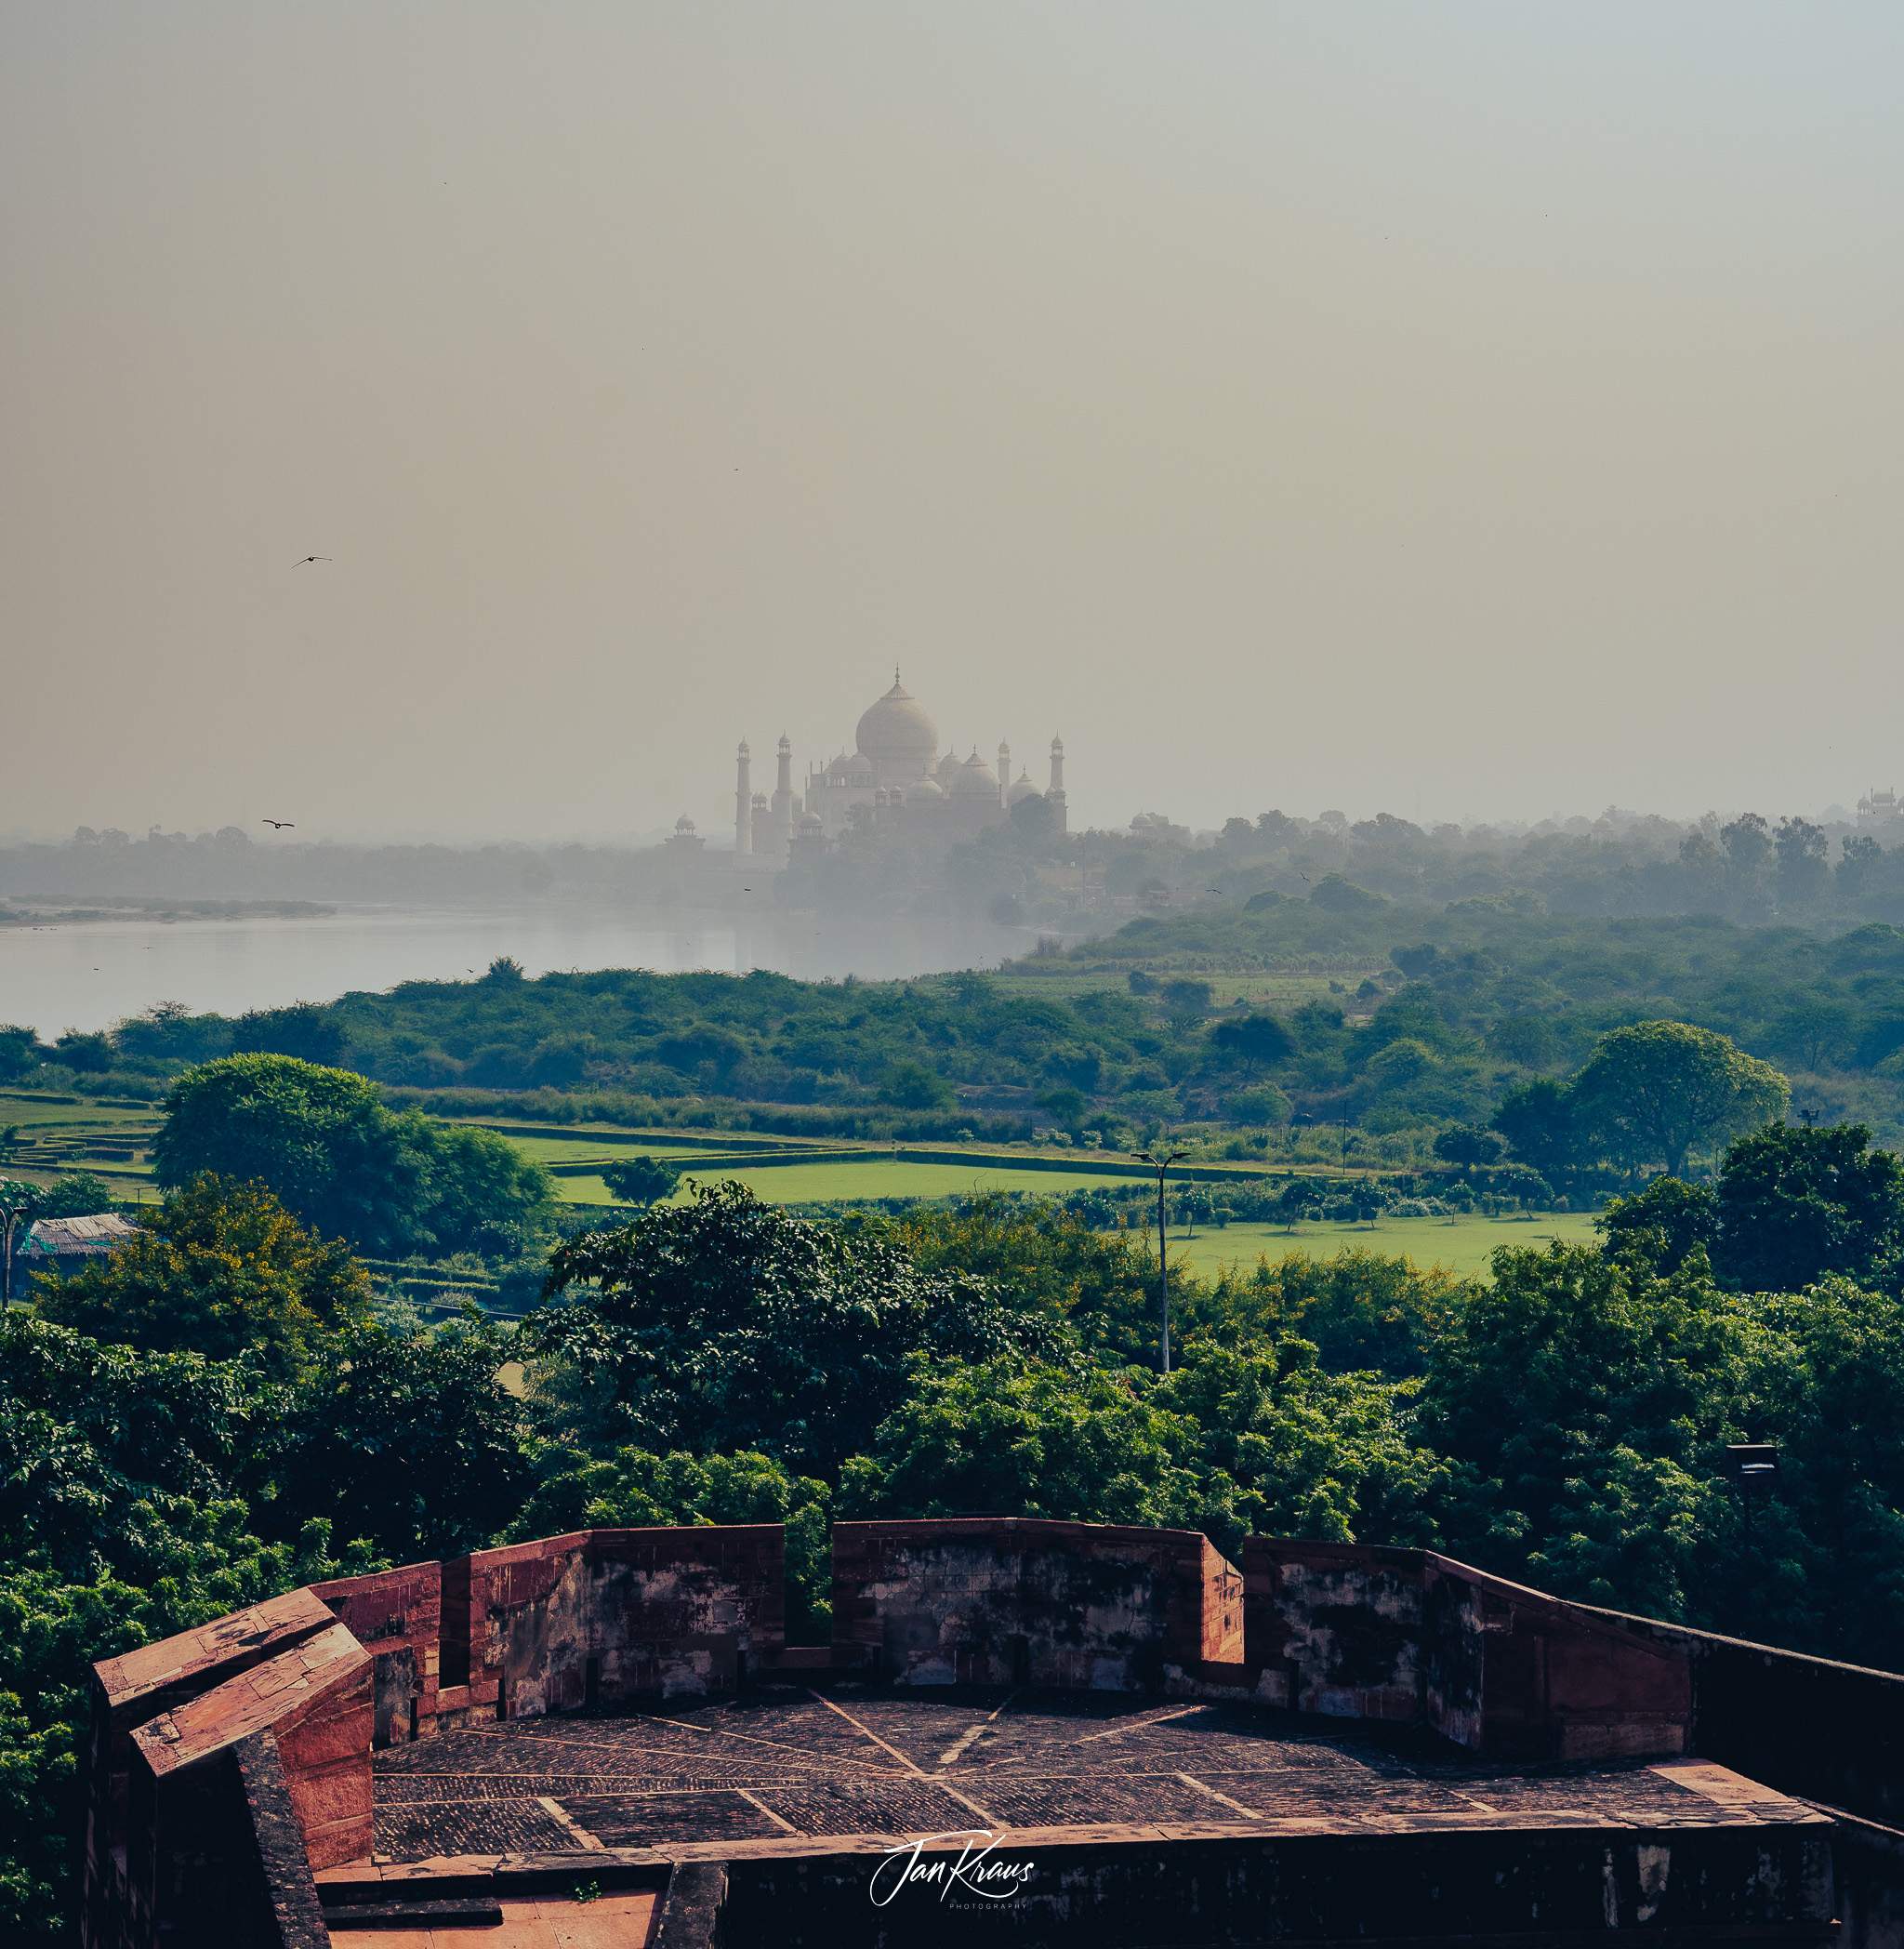 A view of Taj Mahal seen from Agra Fort, India